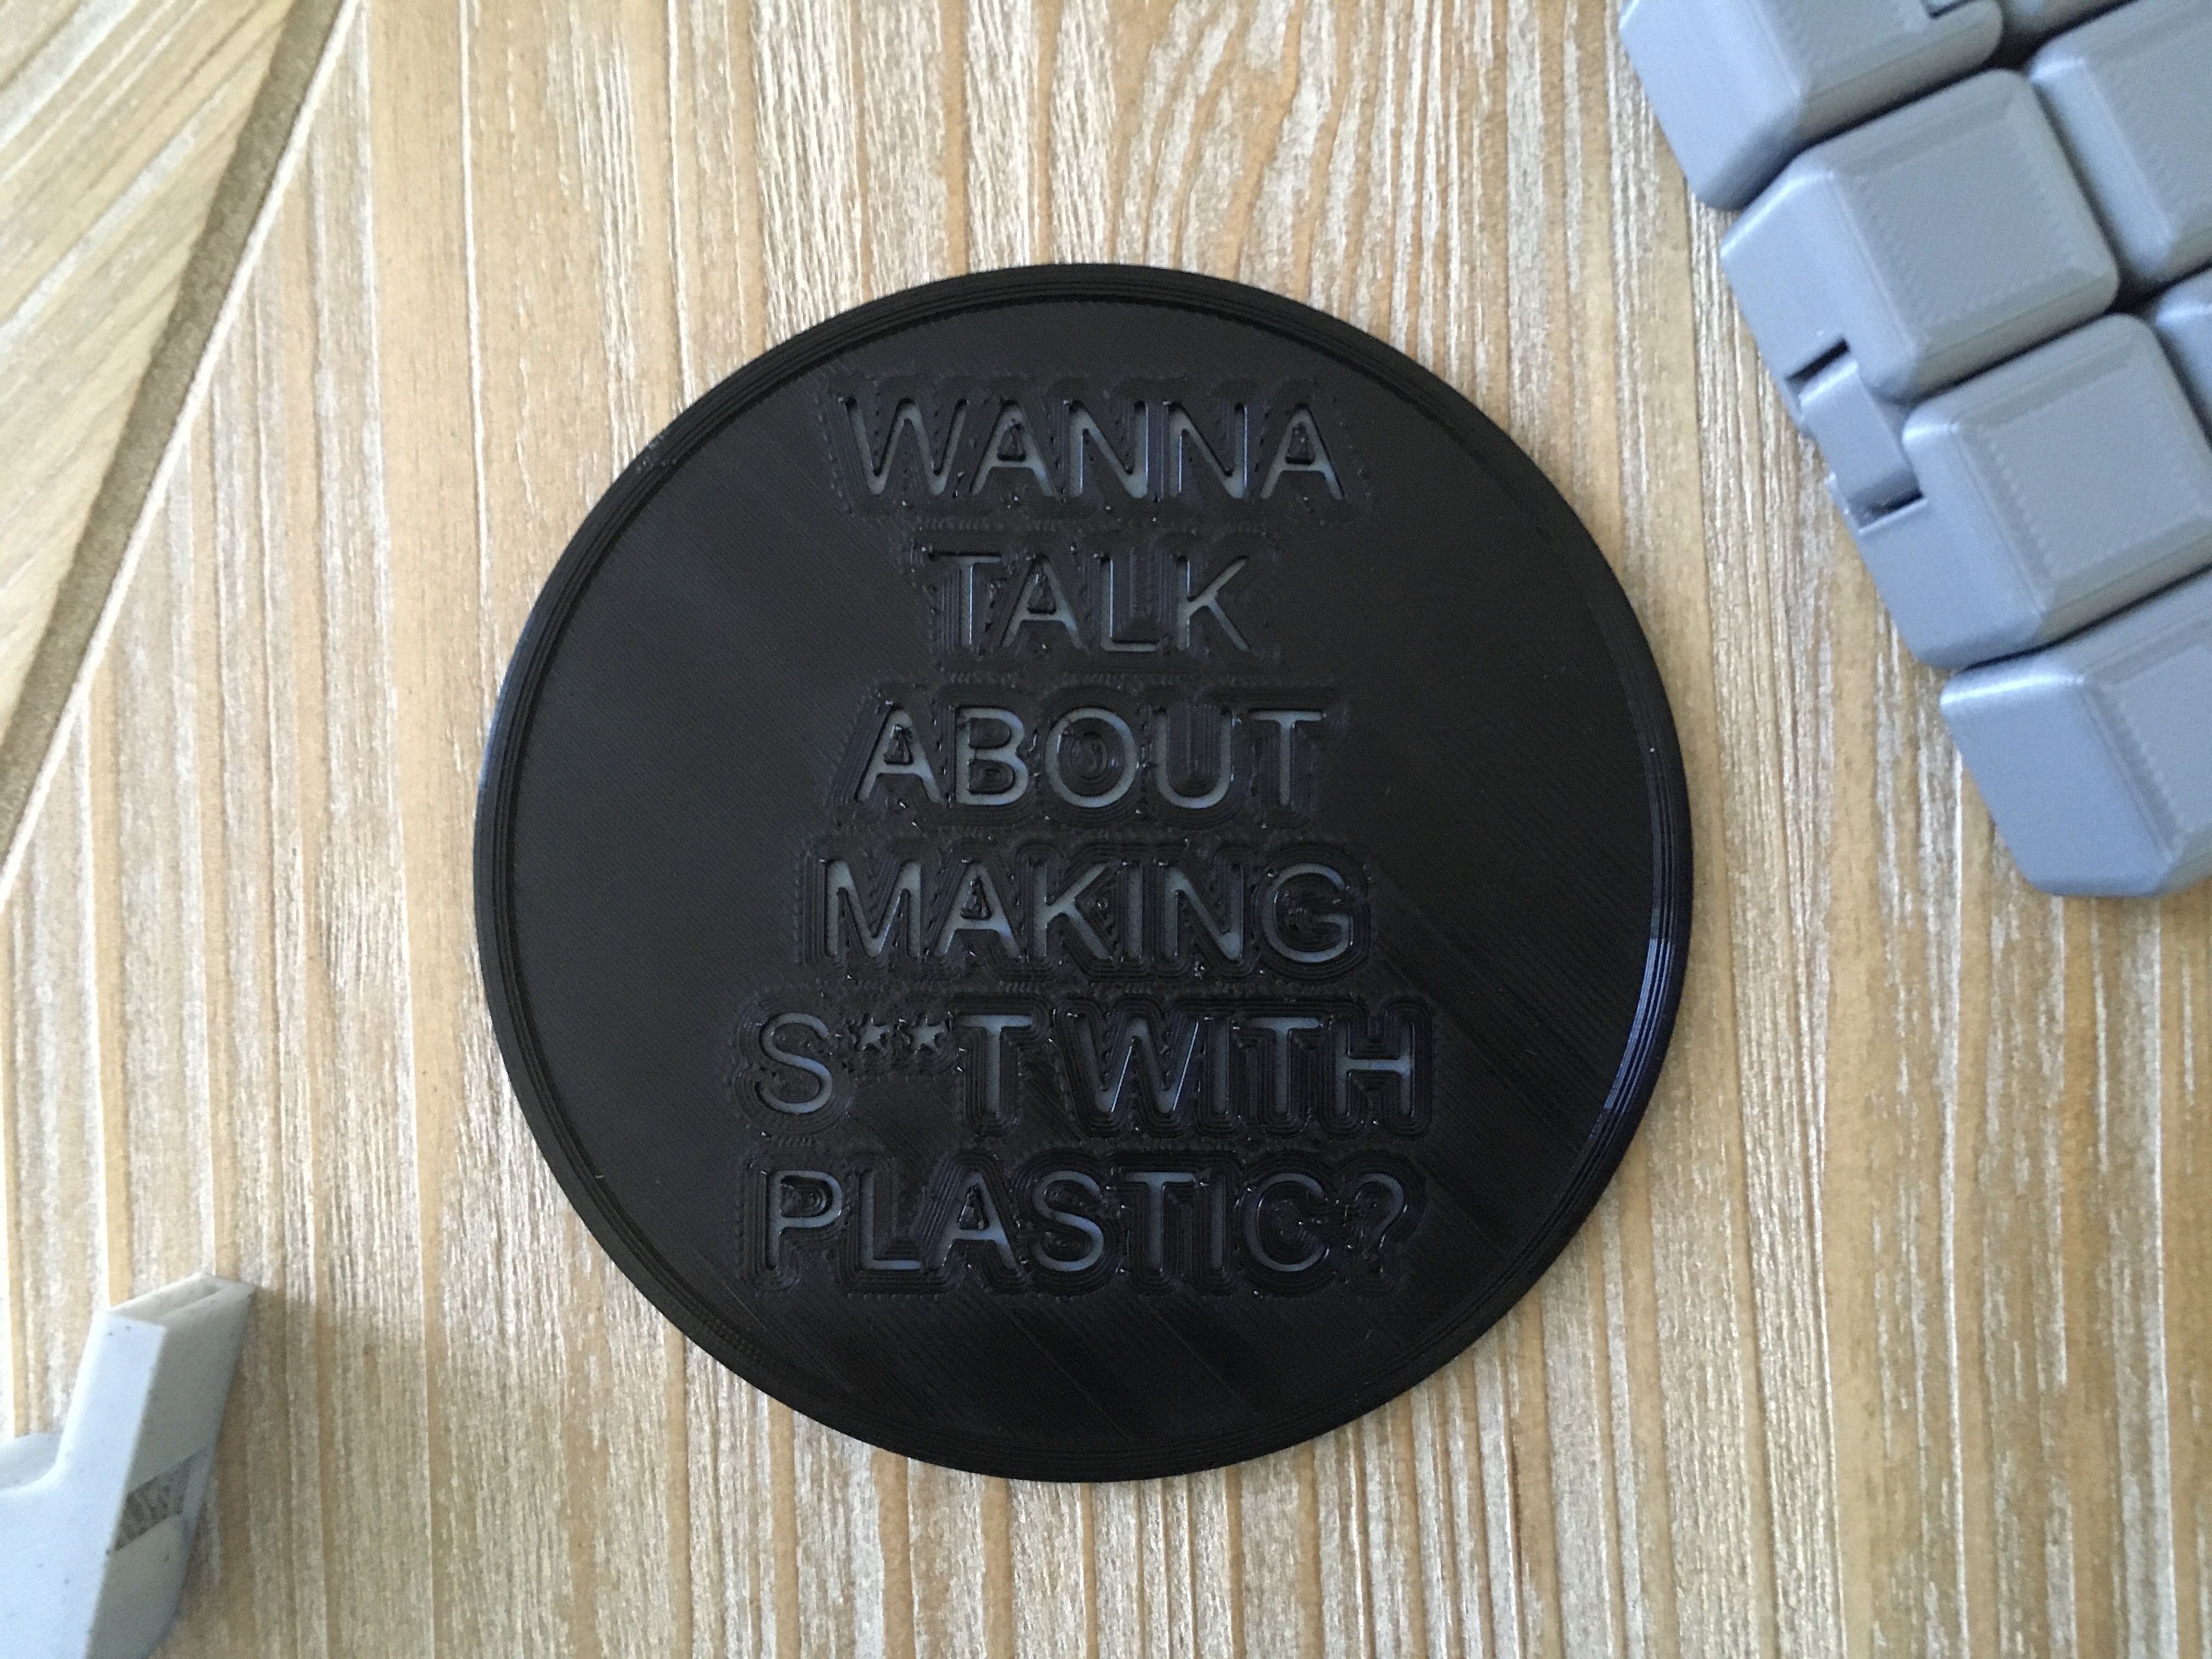 "Wanna talk about making s**t with plastic?" coaster